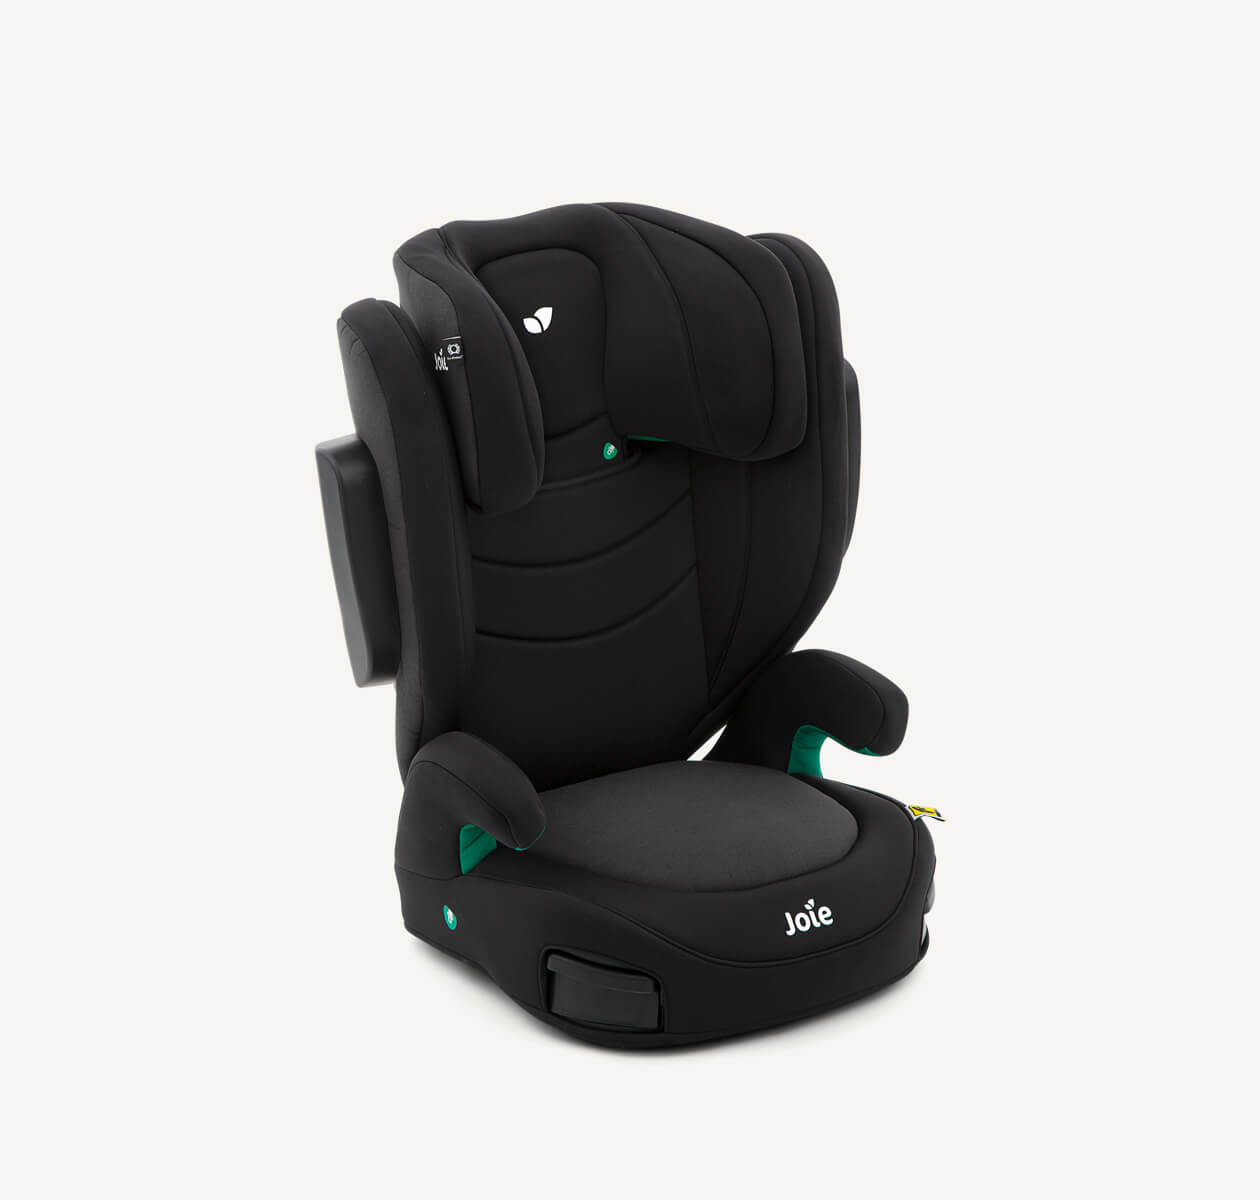 Black I-Trillo high back booster seat facing to the right at a 45 degree angle with the headrest in the lowest position.